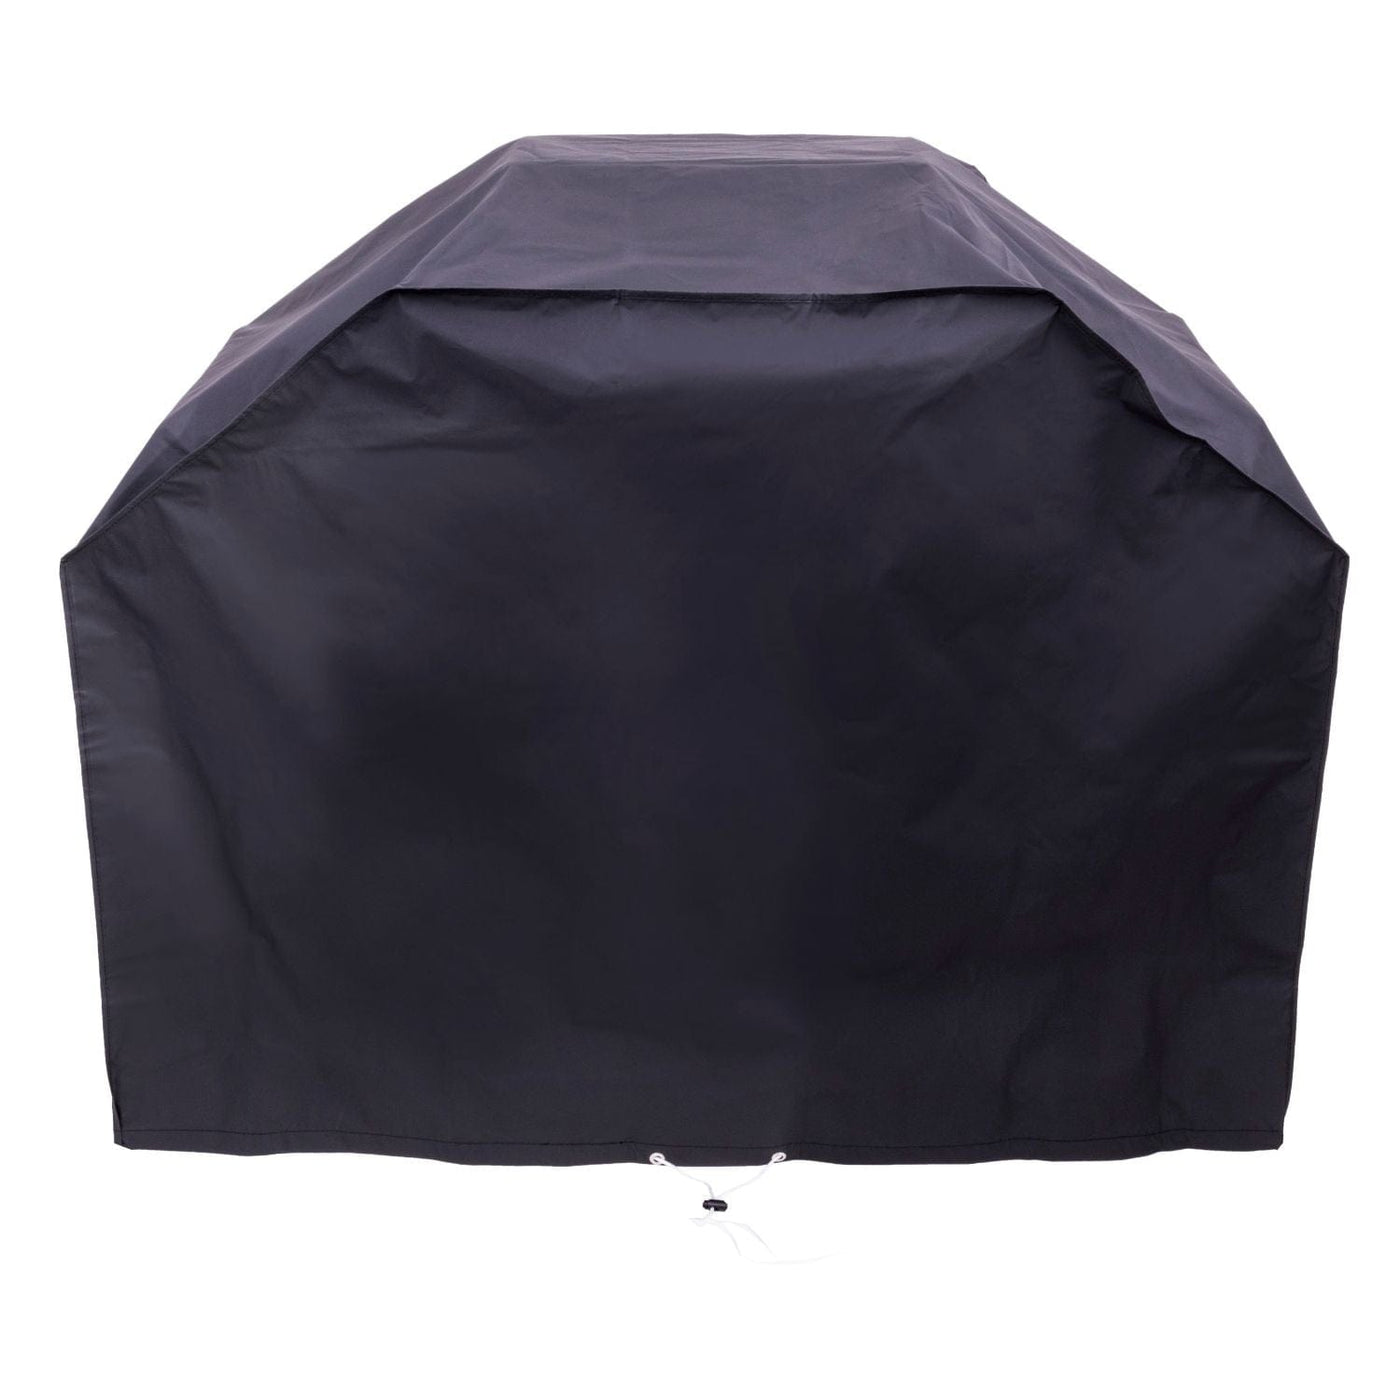 Char-Broil Char-Broil Medium 2 Burner Basic Grill Cover Camping And Outdoor